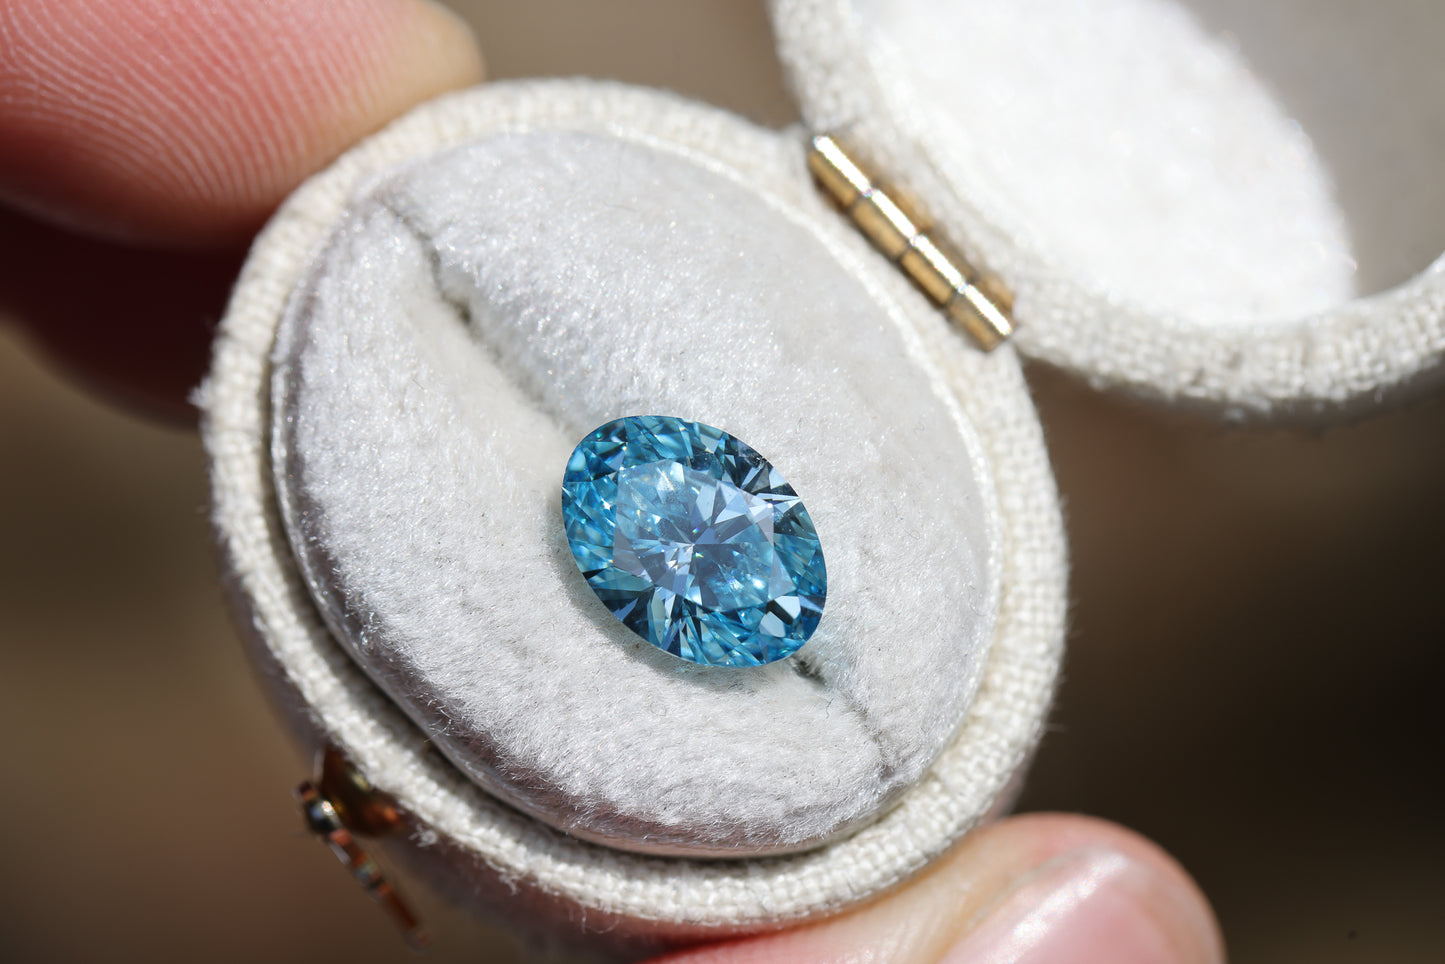 2.5ct oval fancy color blue teal lab diamond, SI1